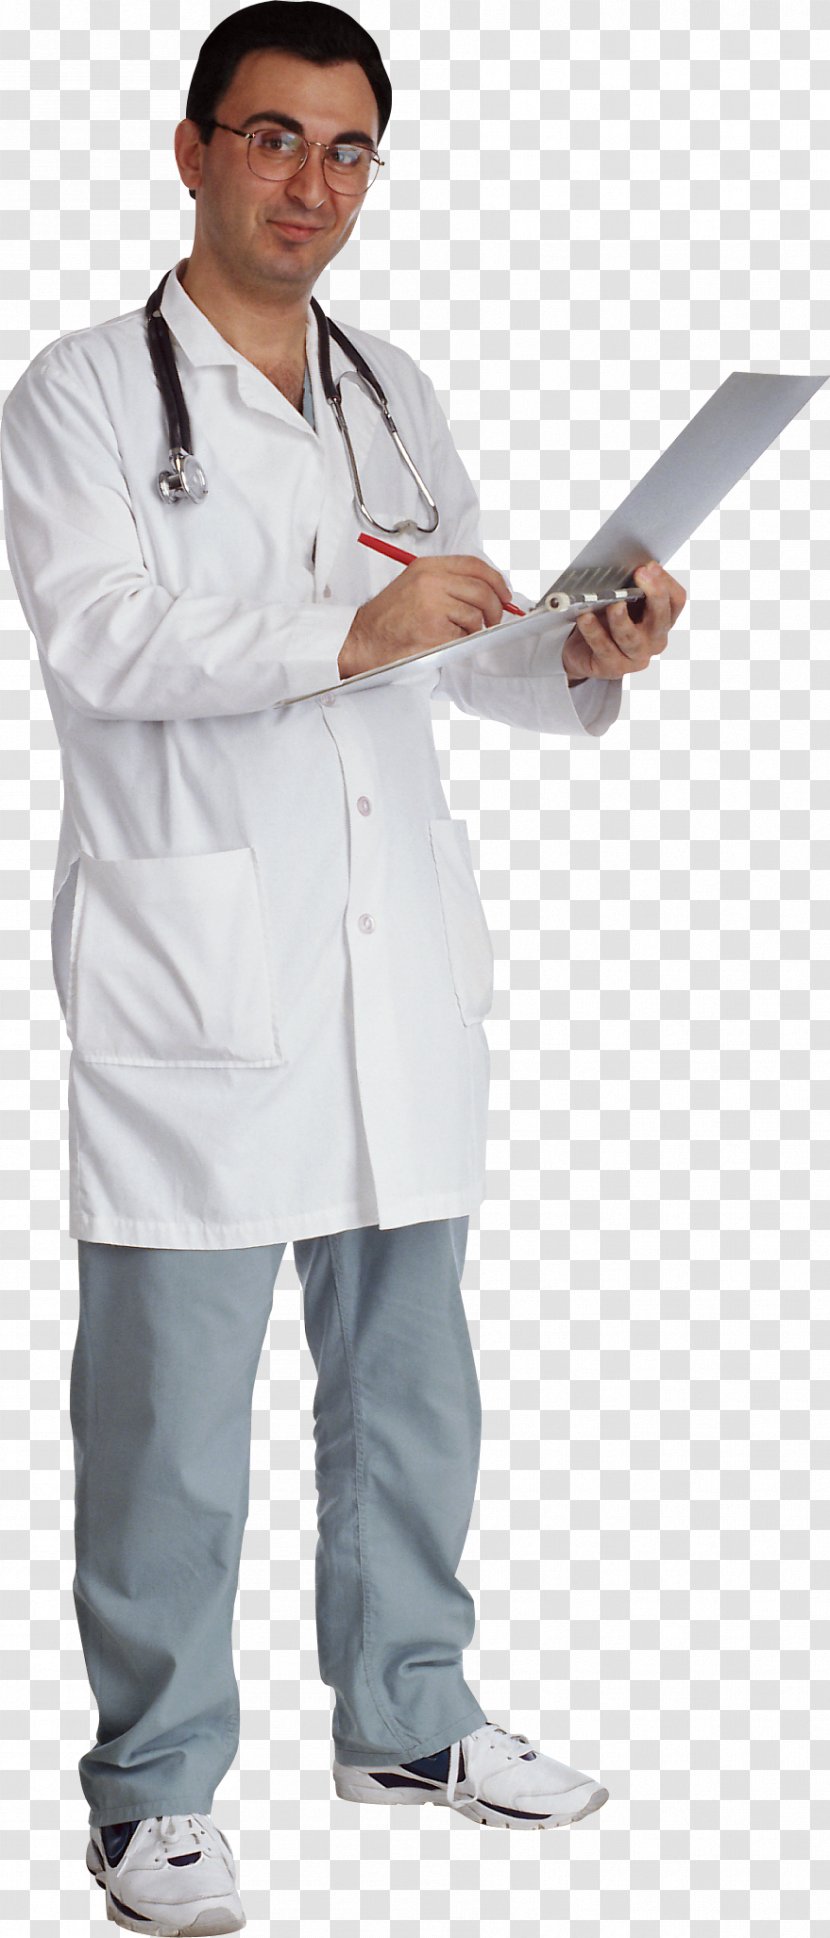 Physician Icon World Organization Of Family Doctors Computer File - Doctor Transparent PNG